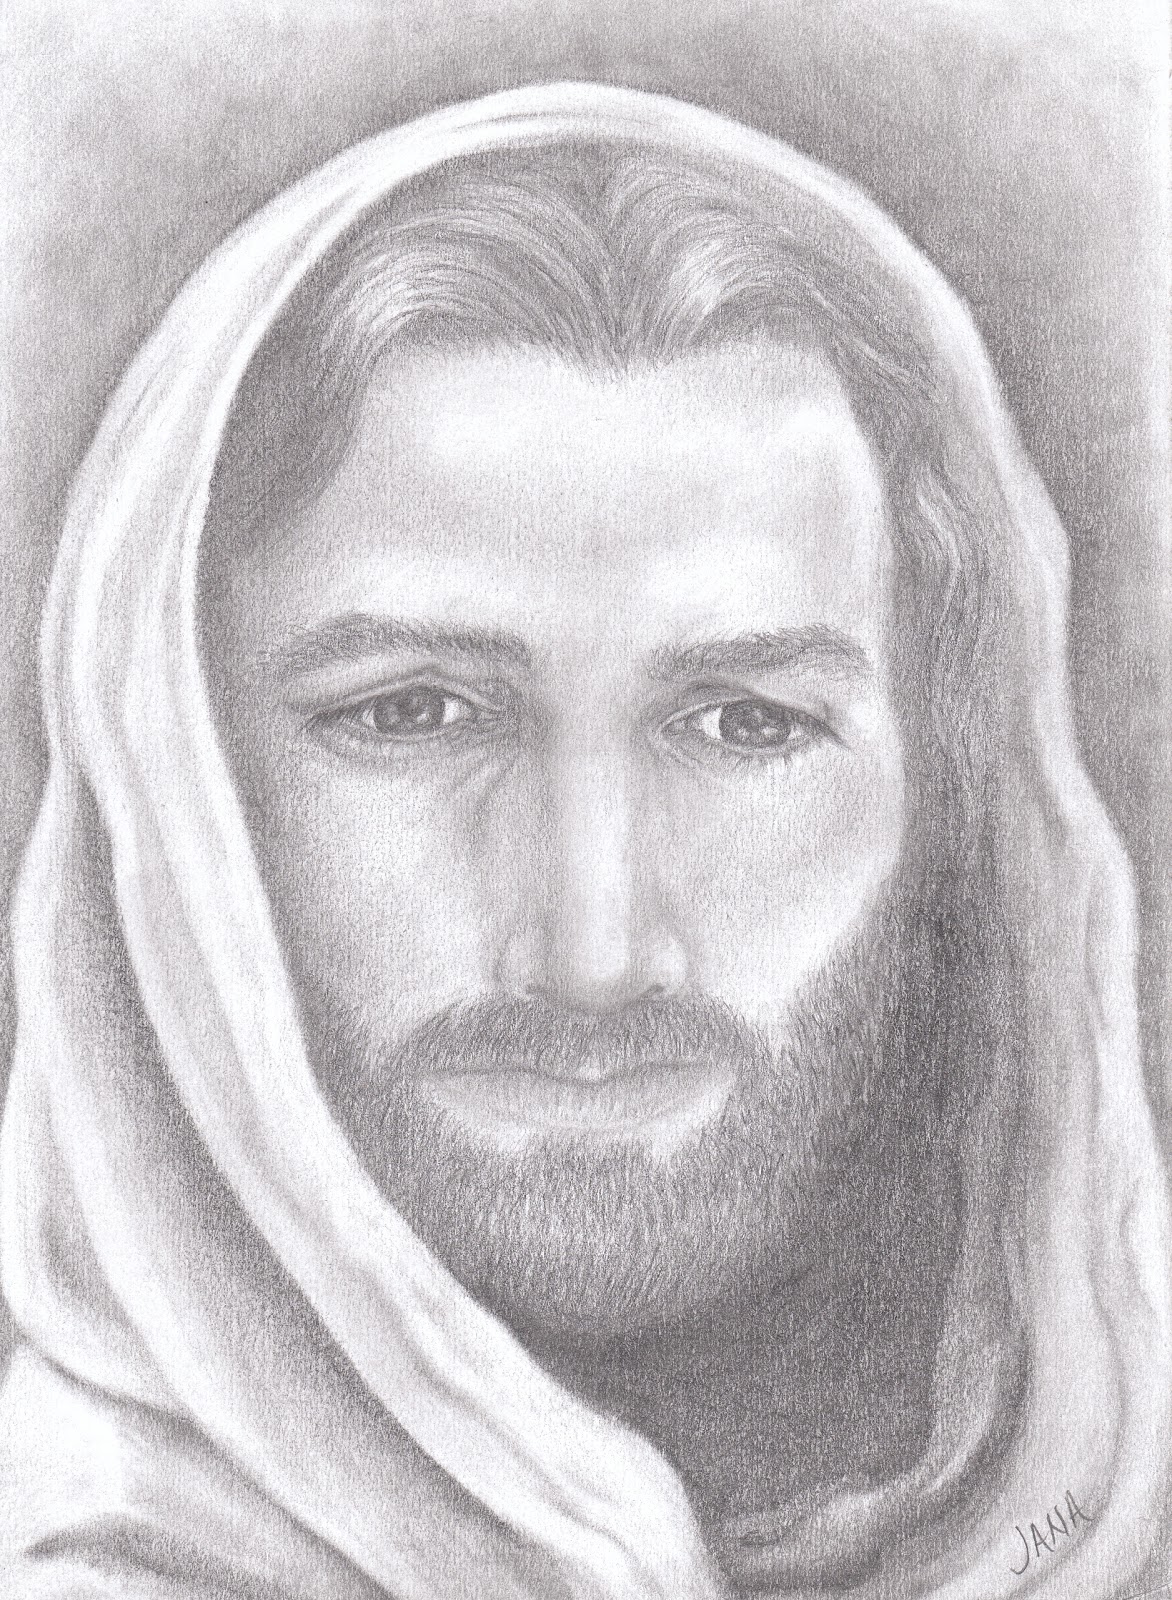 Diamond in the Rough :): My sketch of Christ